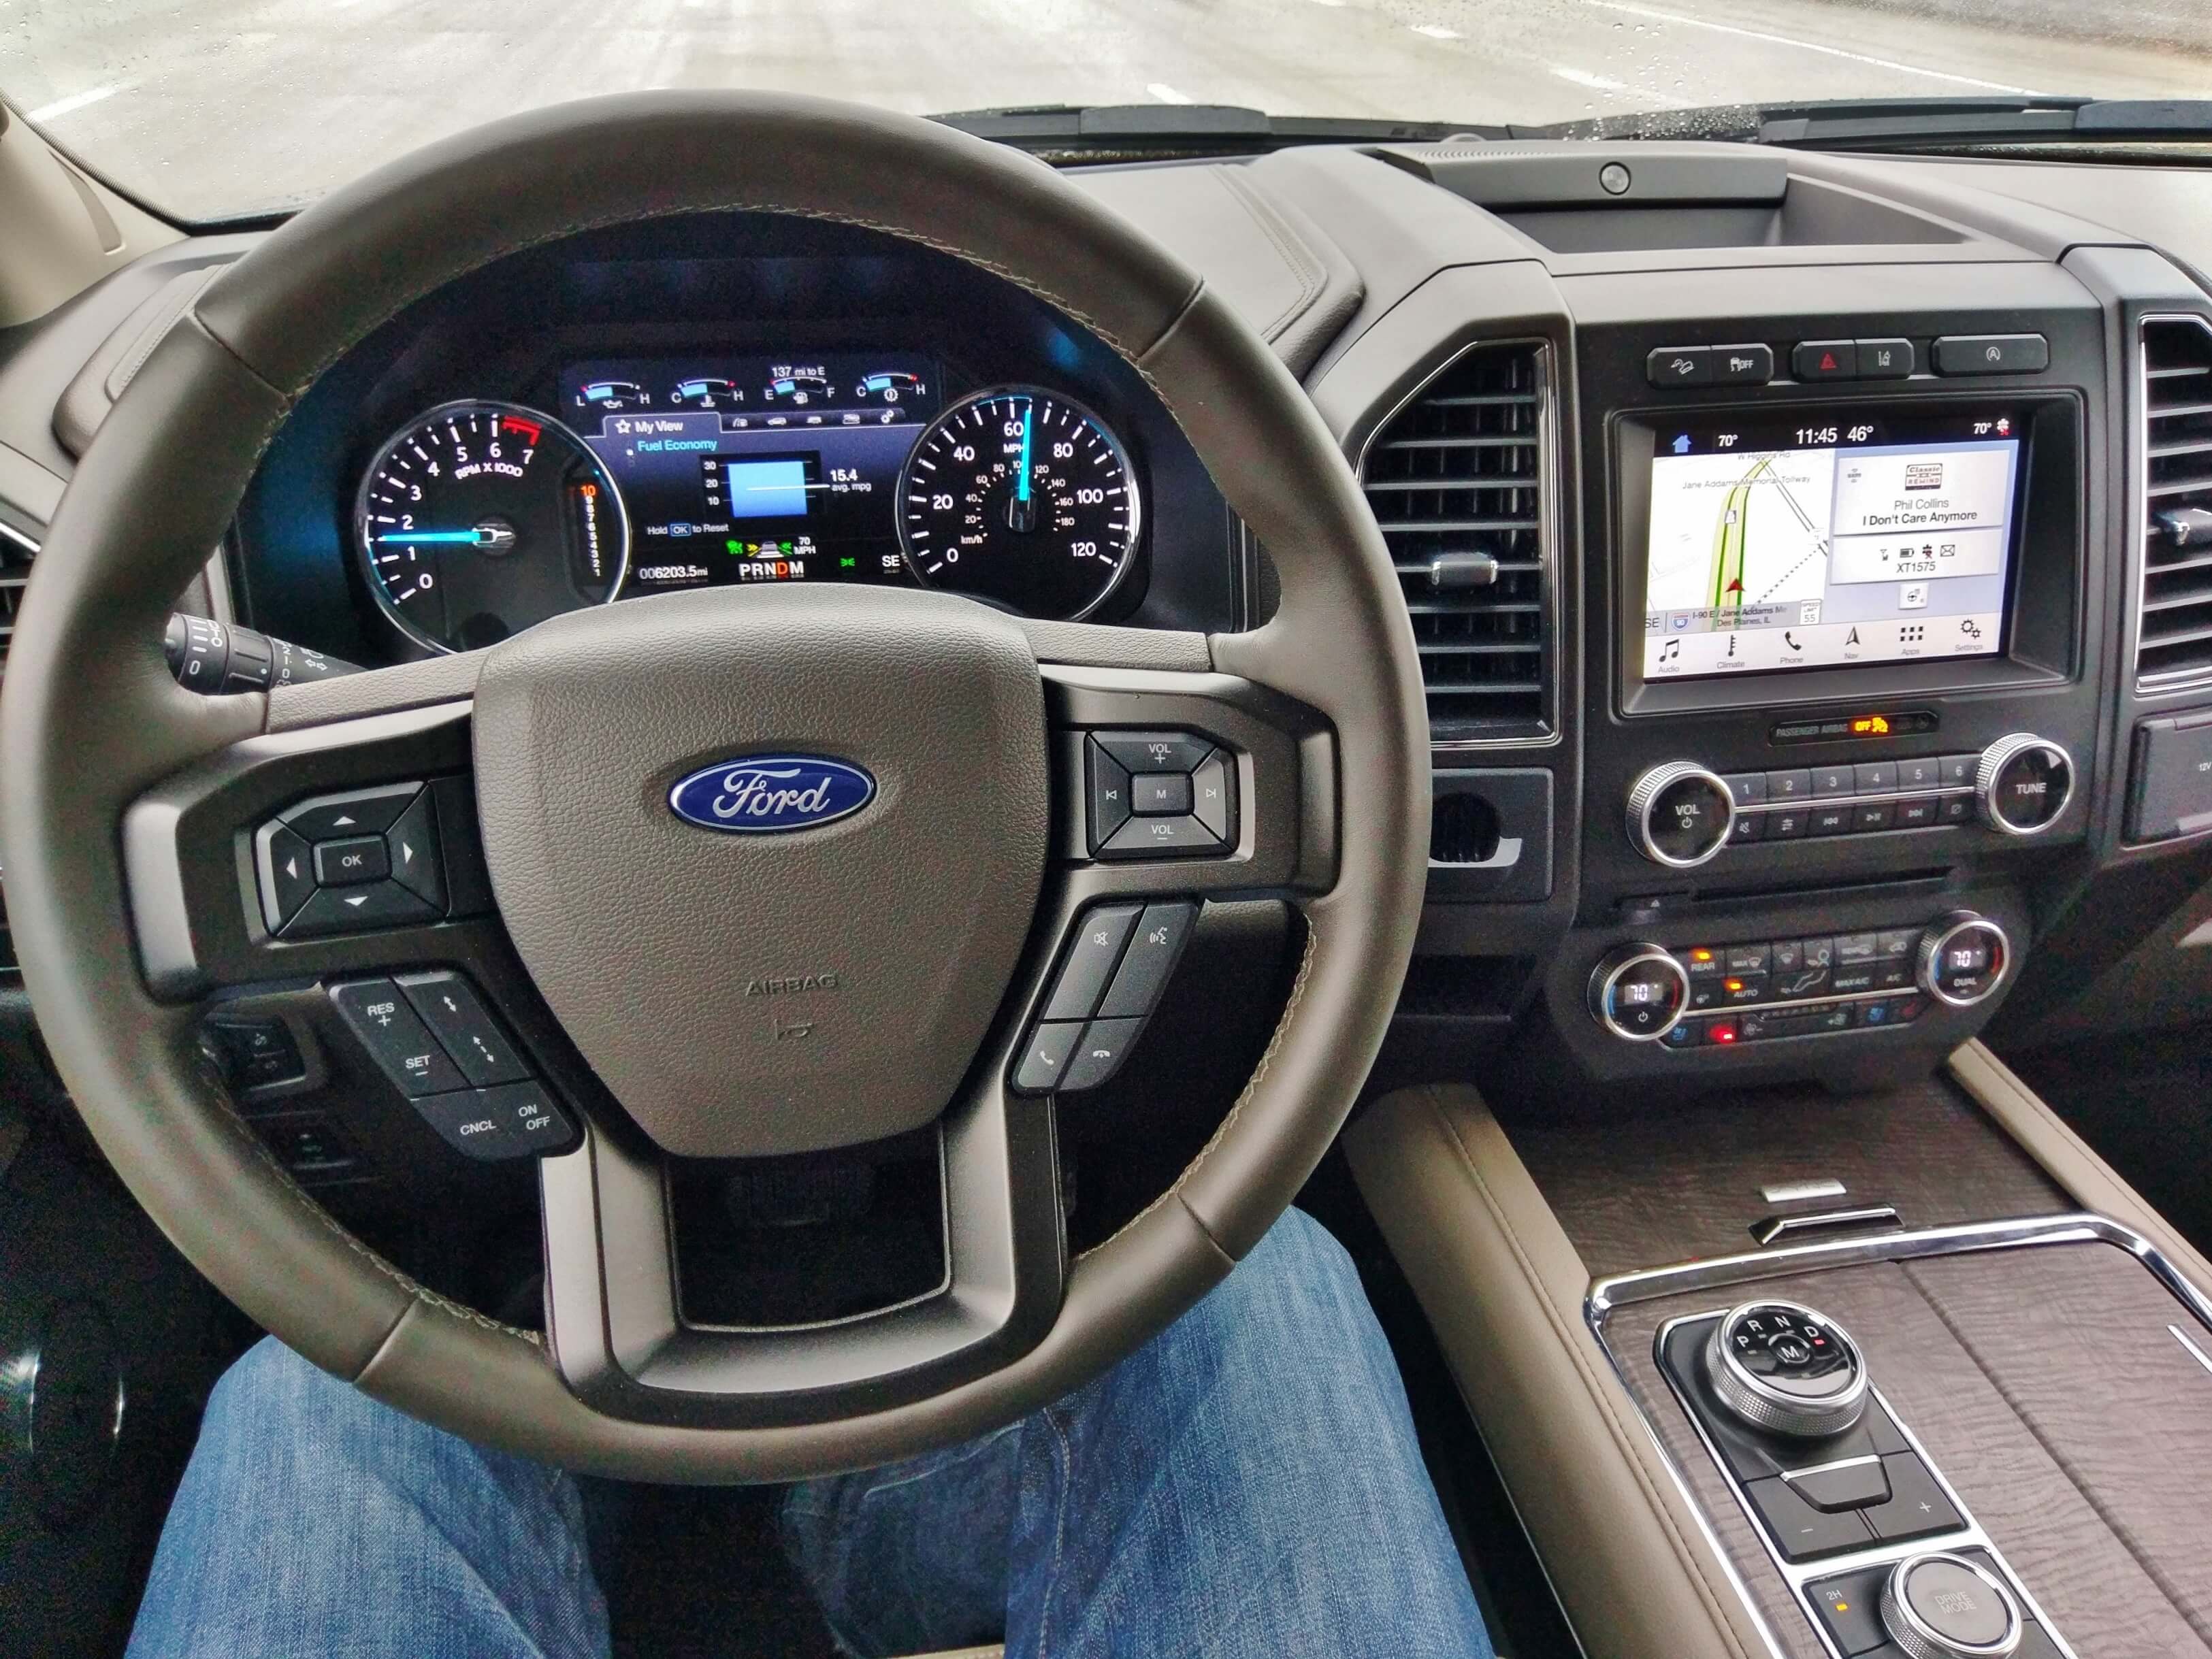 2018 Ford Expedition Limited 4x4: Cockpit while driving